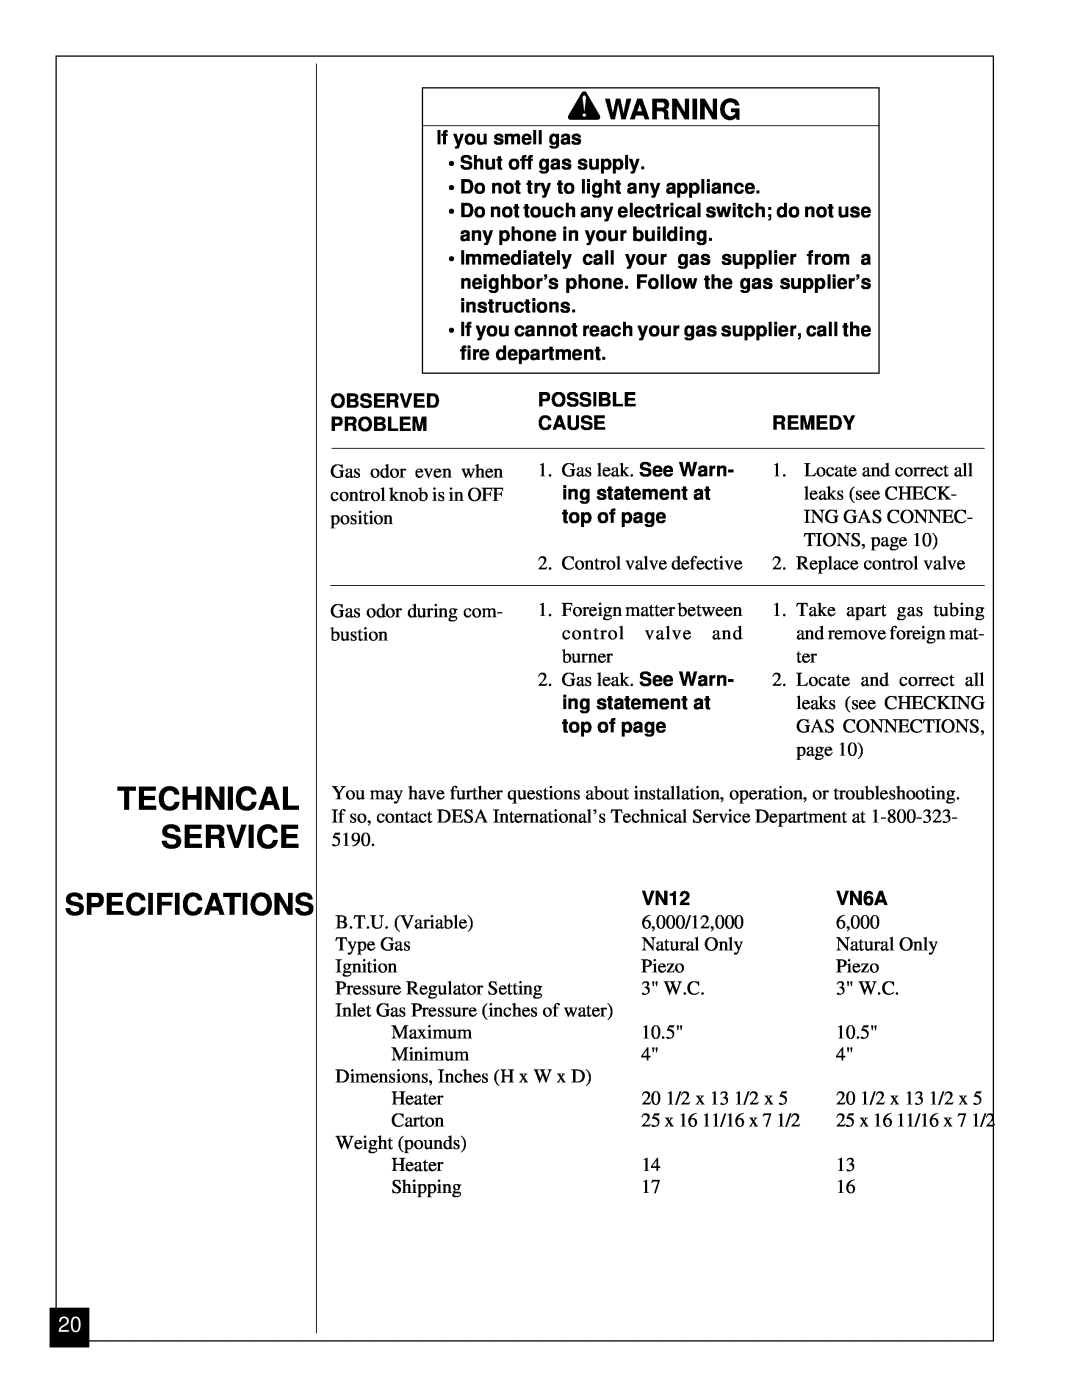 Vanguard Heating VN6A, VN12 installation manual Technical Service, Specifications 